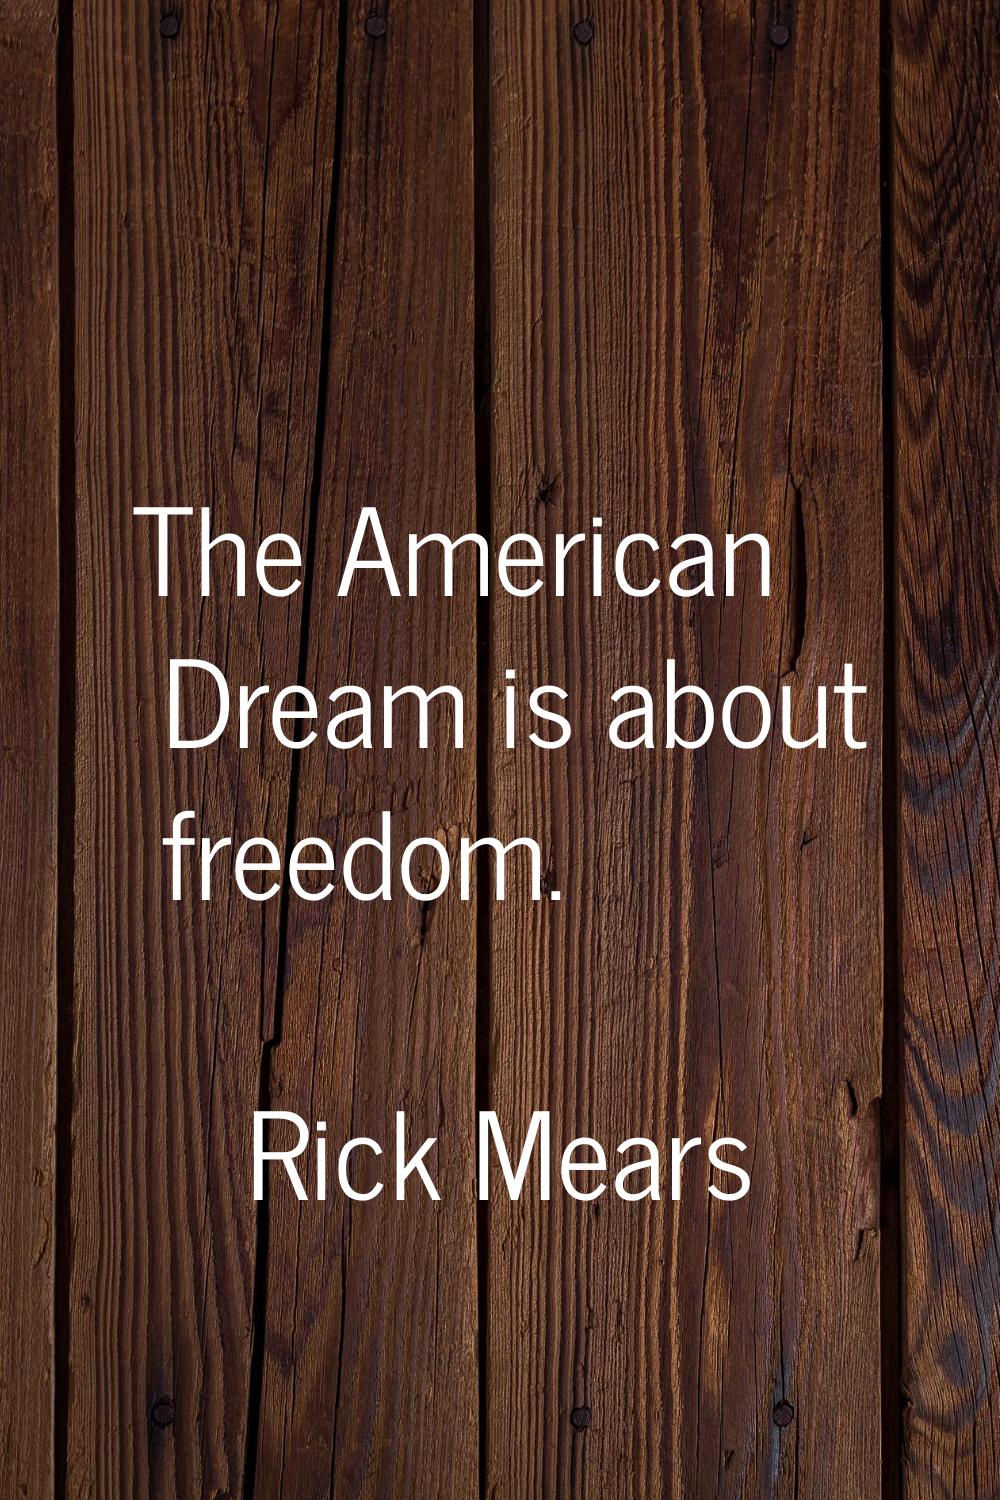 The American Dream is about freedom.